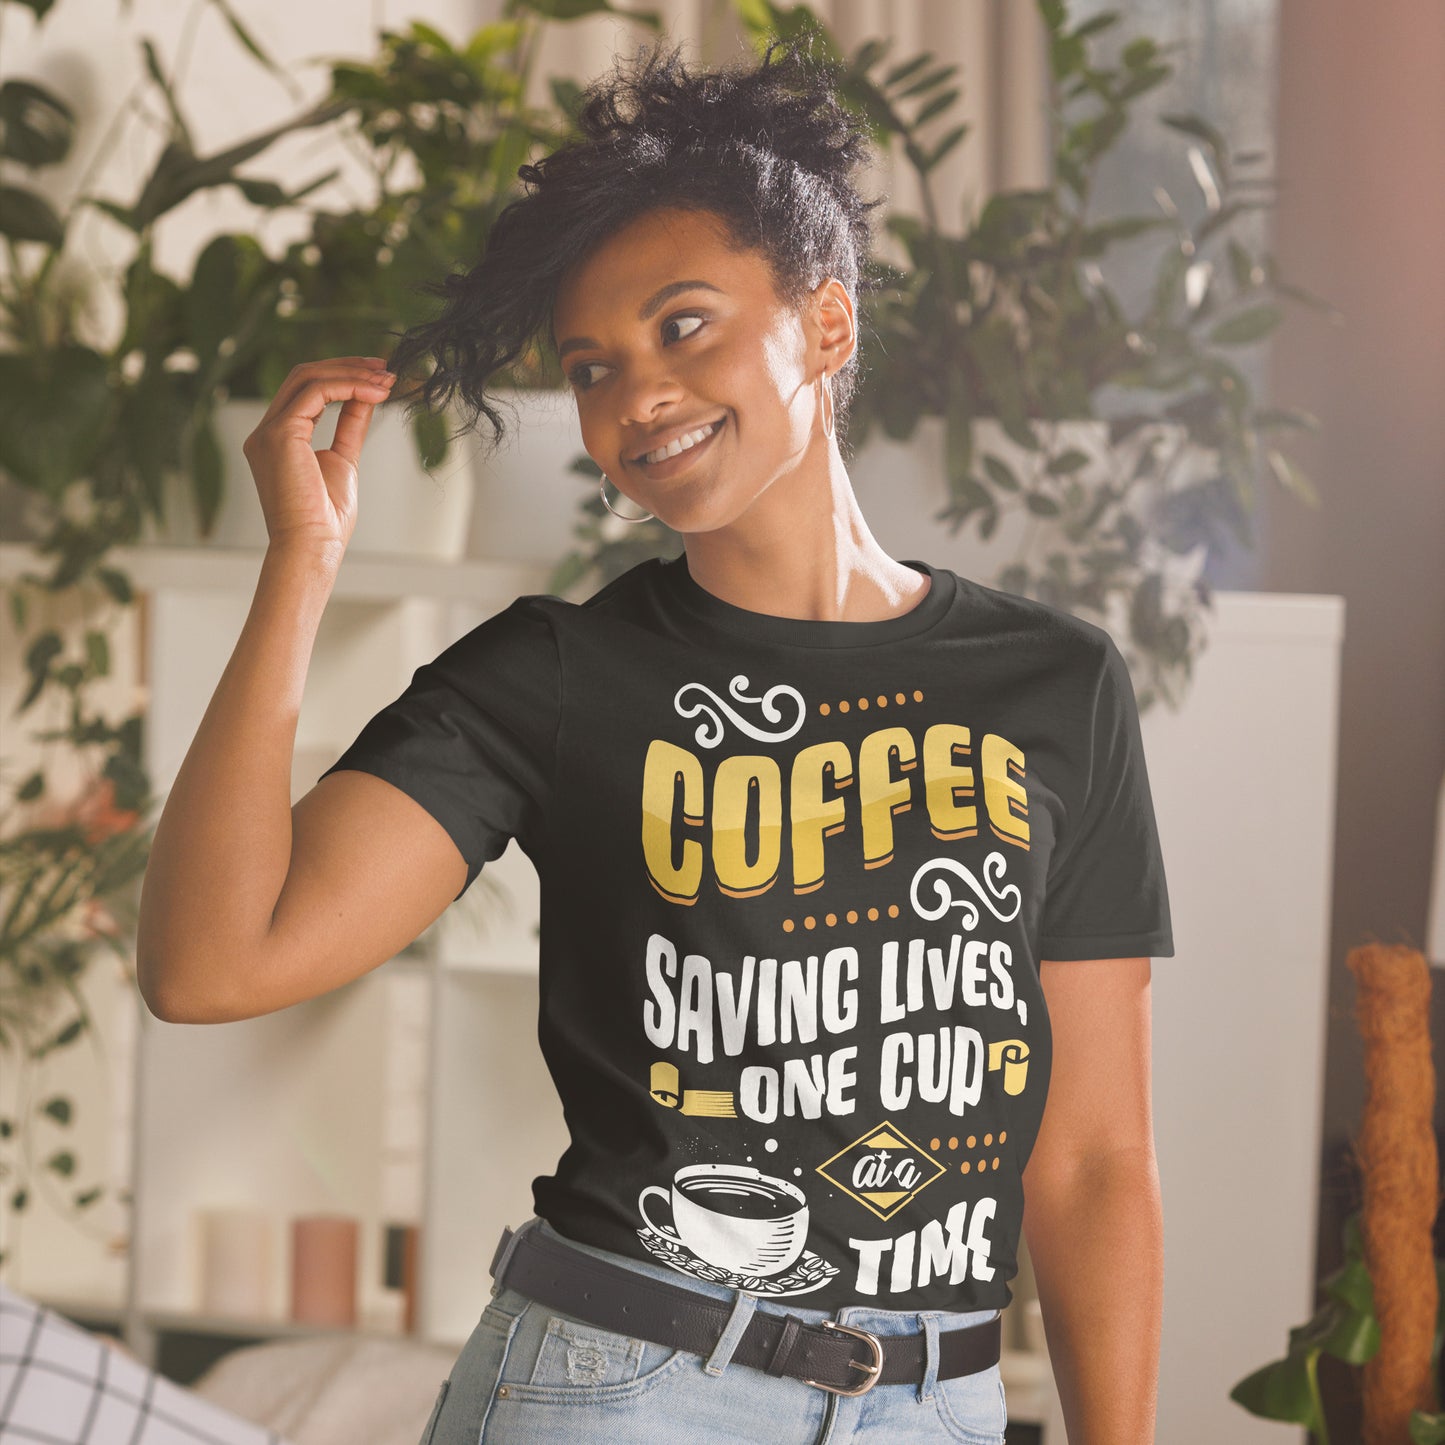 Buy 'Coffee - Saving Lives' Tee | Exclusive Unisex Shirt for Coffee Enthusiasts